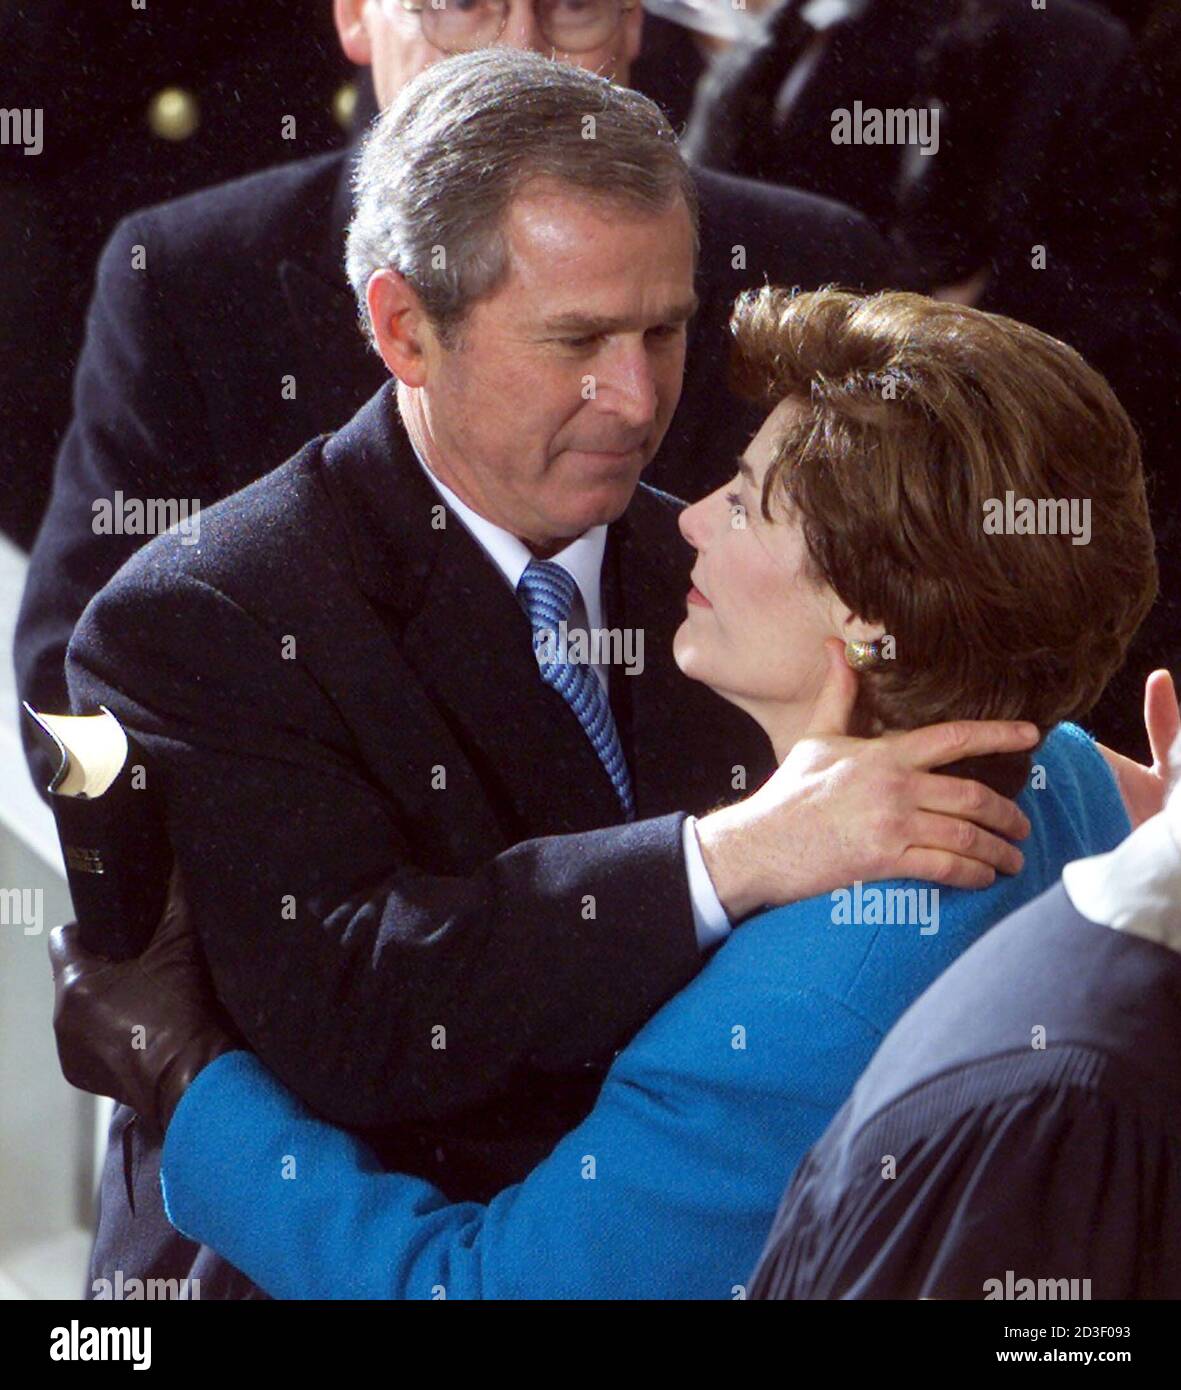 George W. Bush hugs his wife Laura after taking the oath of office to become the 43rd president of the United States in Washington, January 20, 2001. Bush pledged he would work to build 'a single nation of justice and opportunity. Stock Photo